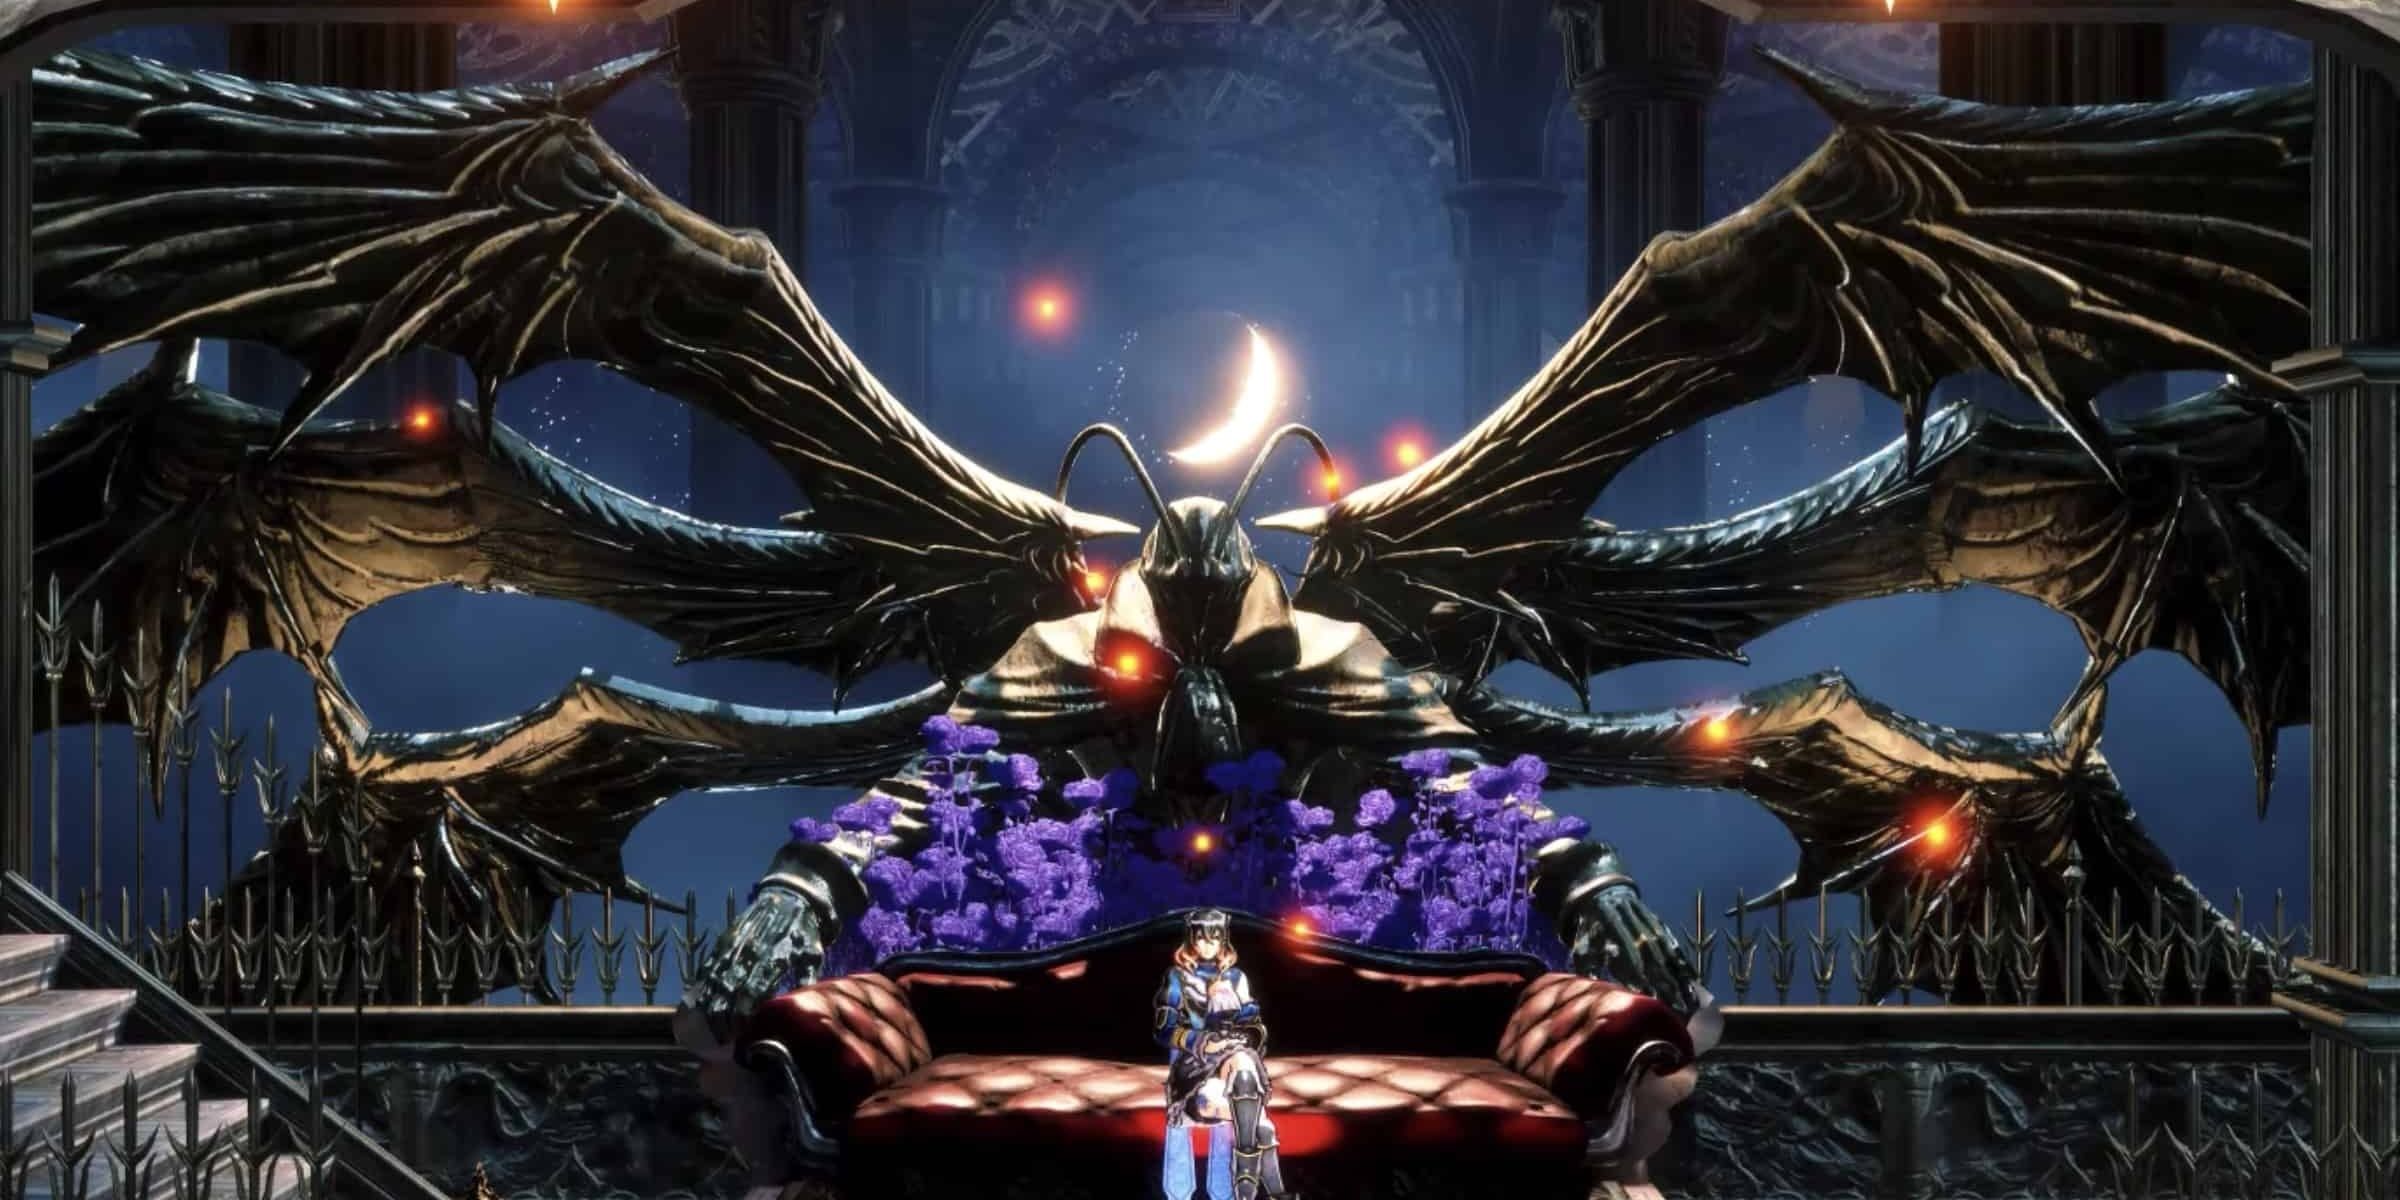 One of the many rooms in the castle in Bloodstained: Ritual of the Night